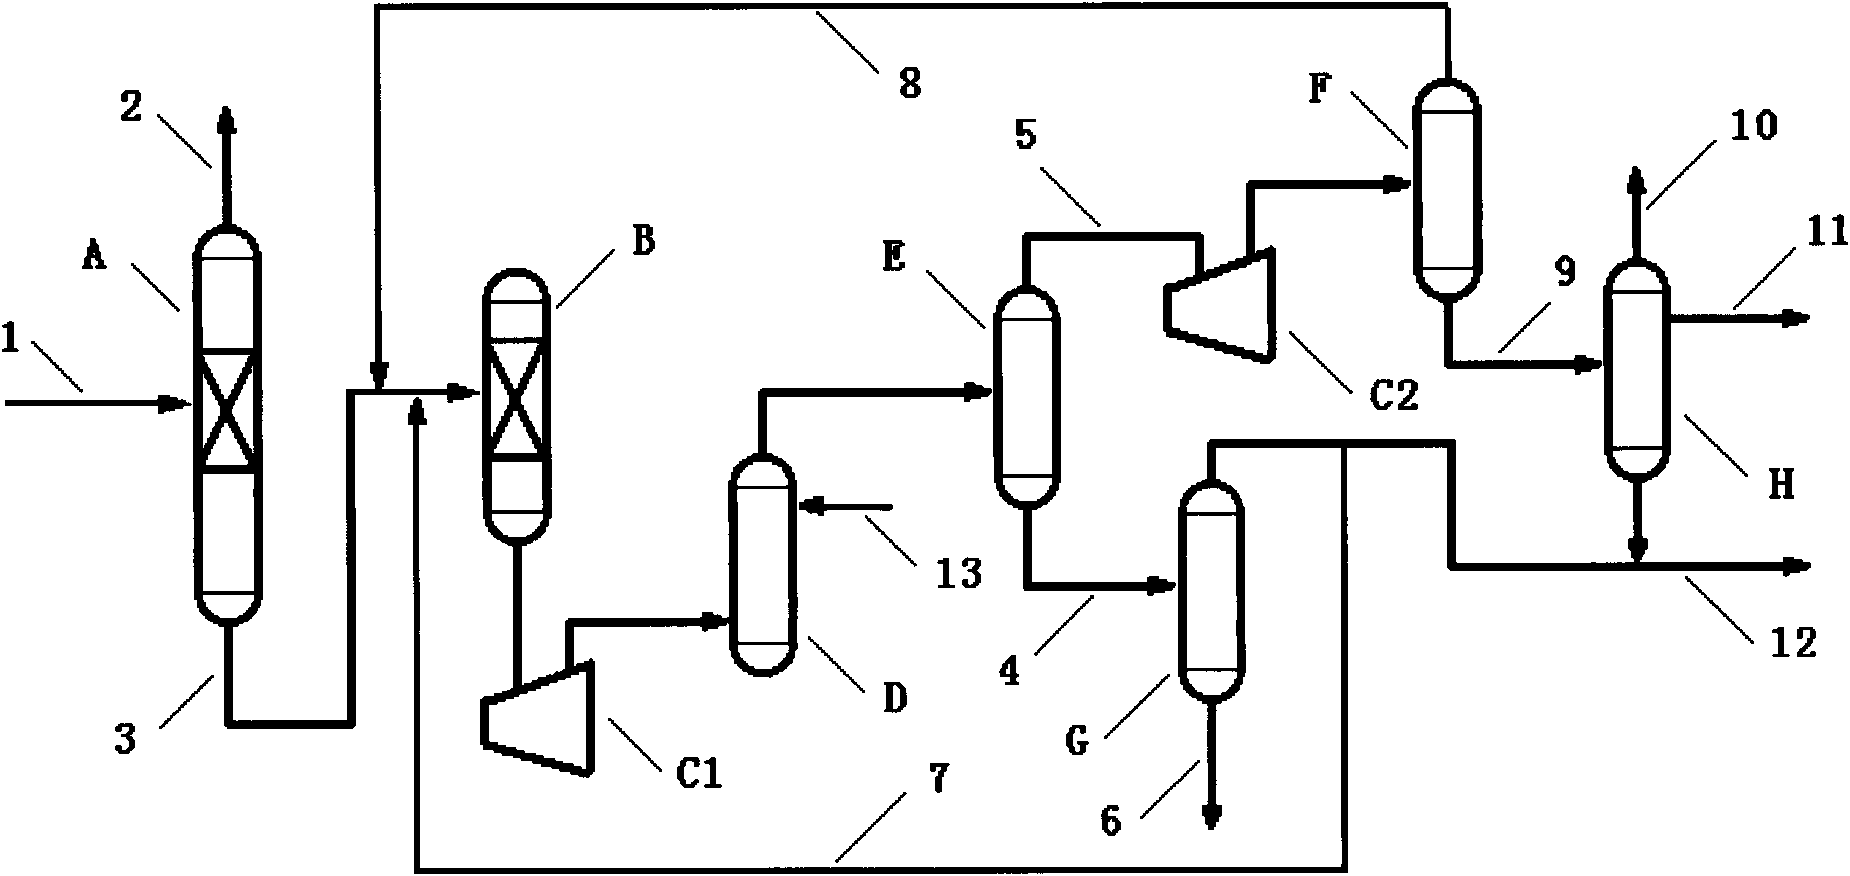 Method for preparing propylene from refinery mixed C4